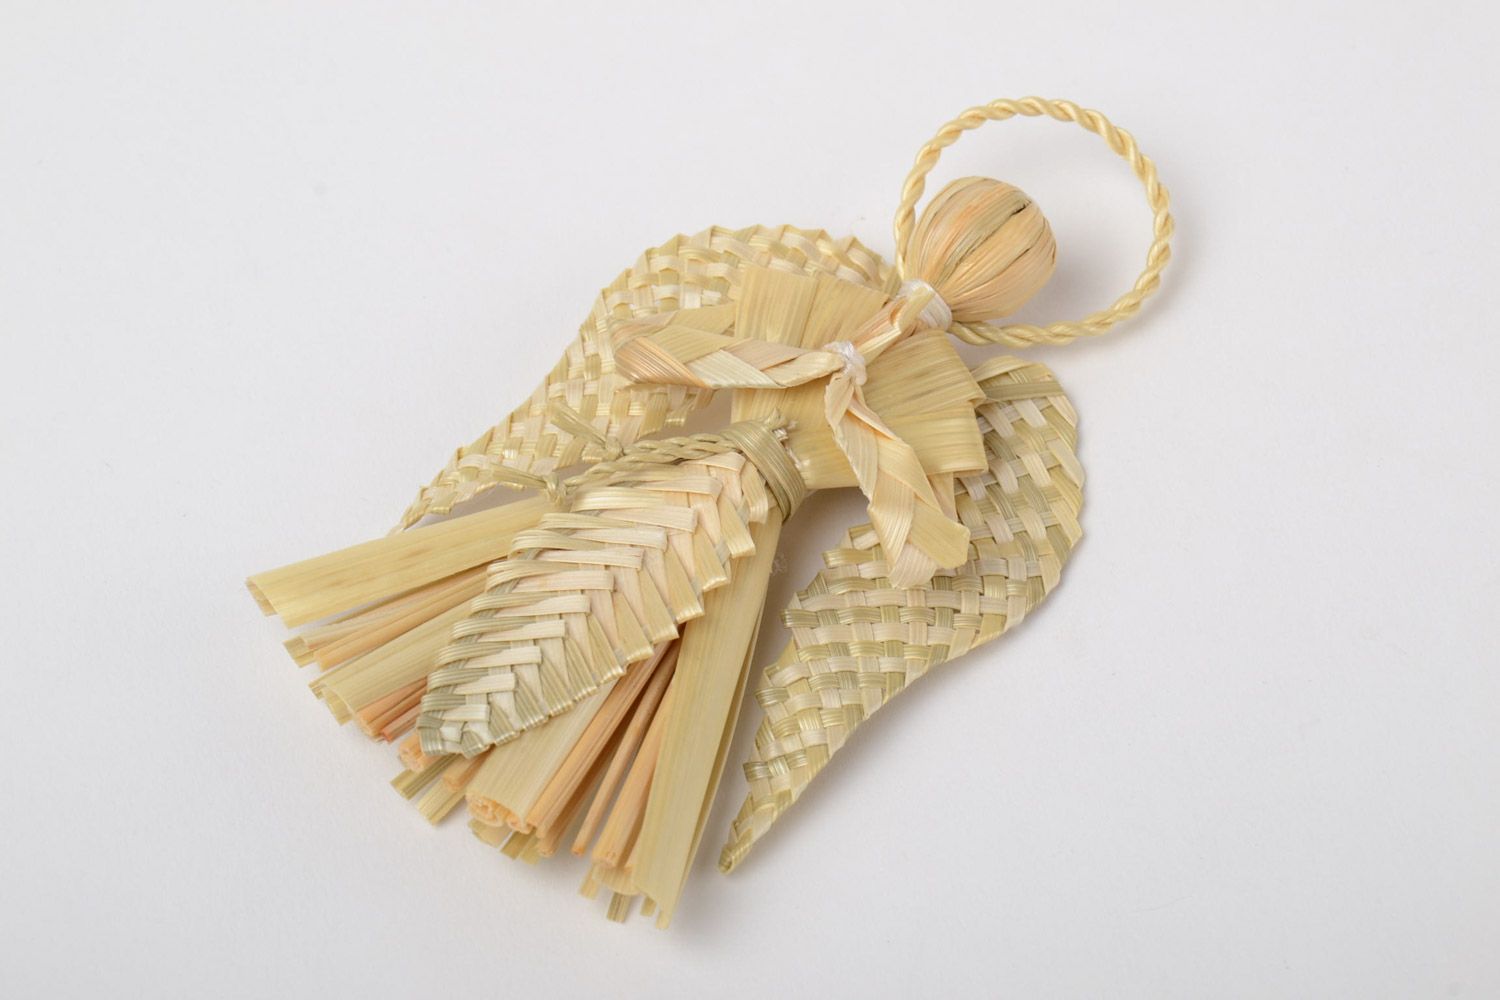 Eco friendly home decoration guardian angel woven of natural straw handmade photo 3